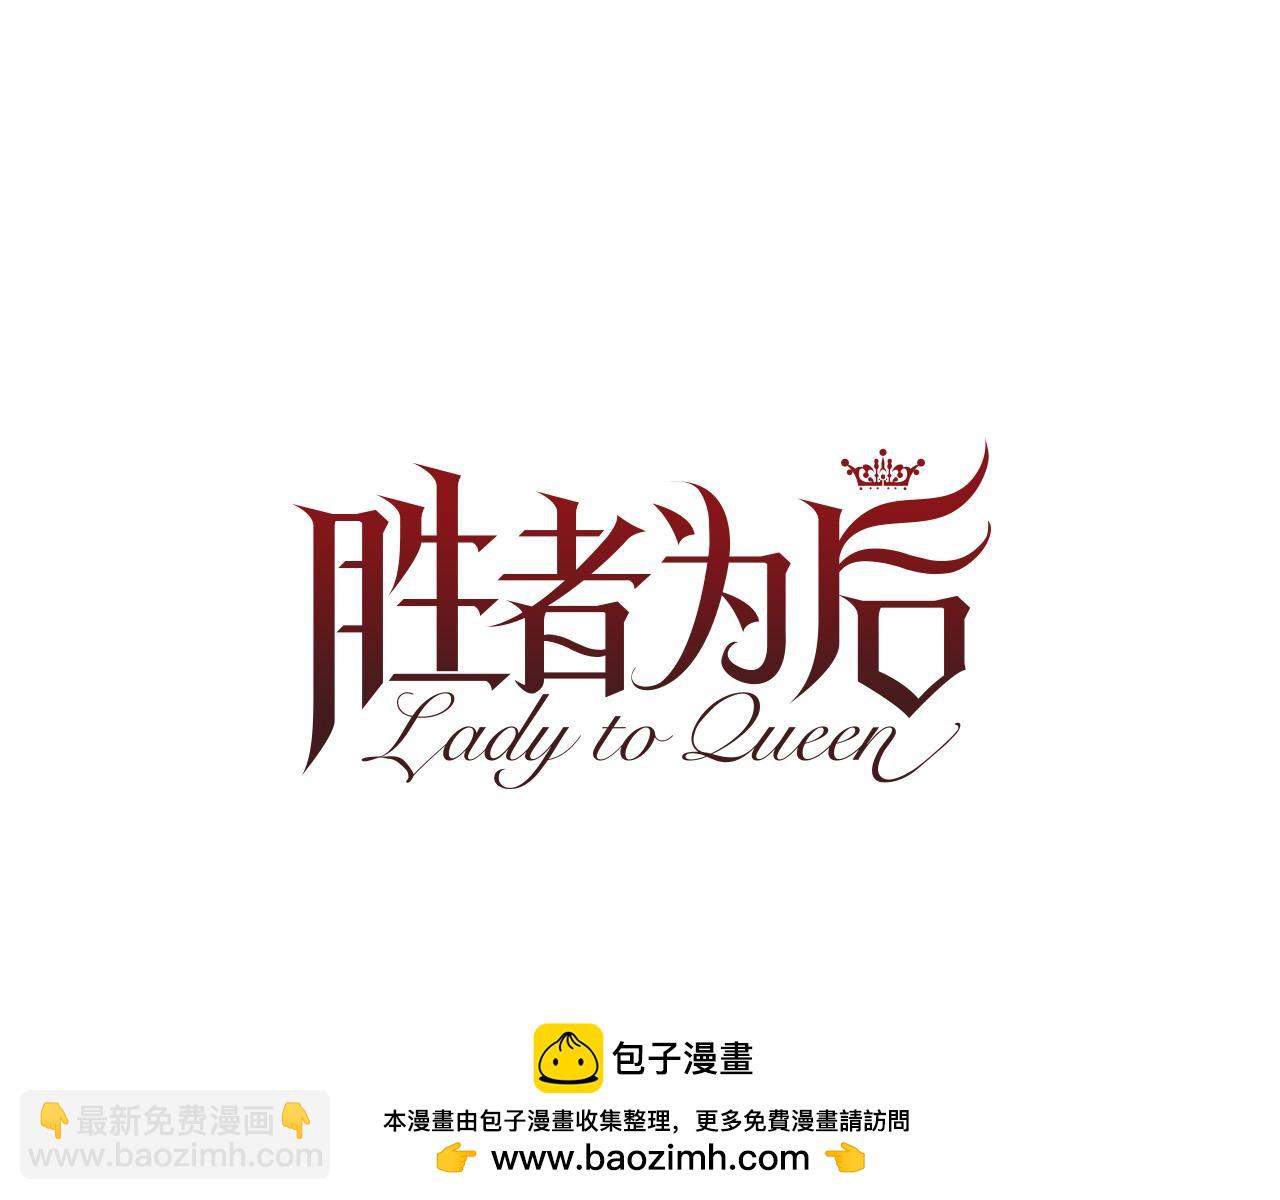 Lady to Queen-勝者爲後 - 第73話 圓房(2/3) - 7